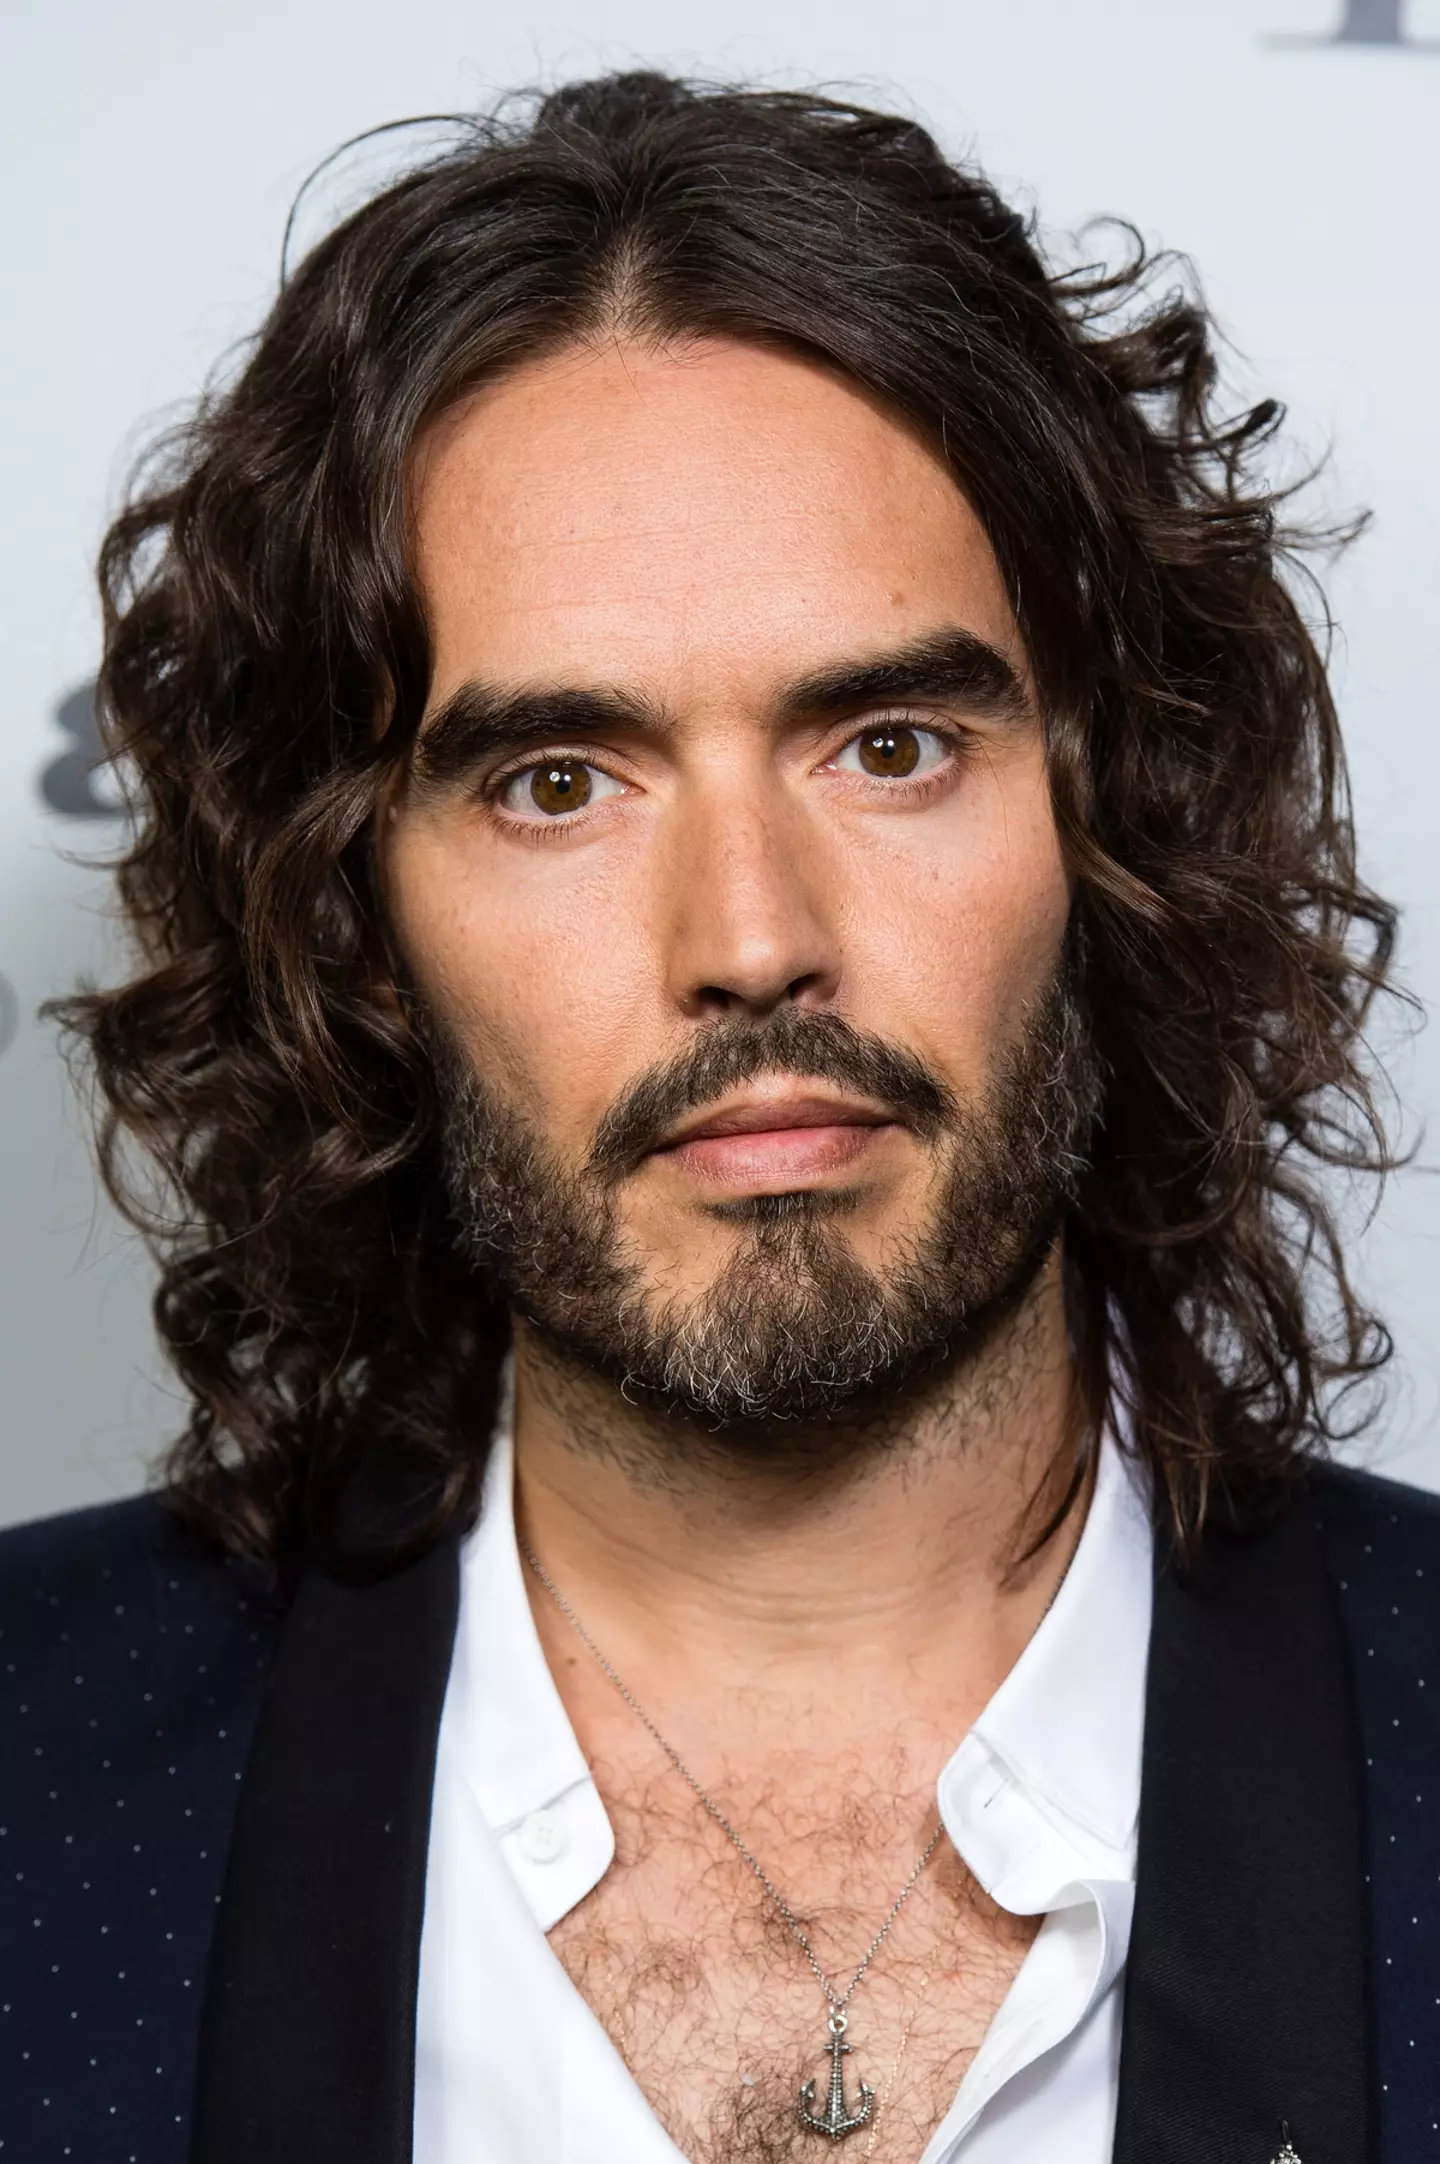 Russell Brand has been accused of sexual assault and rape by several women.